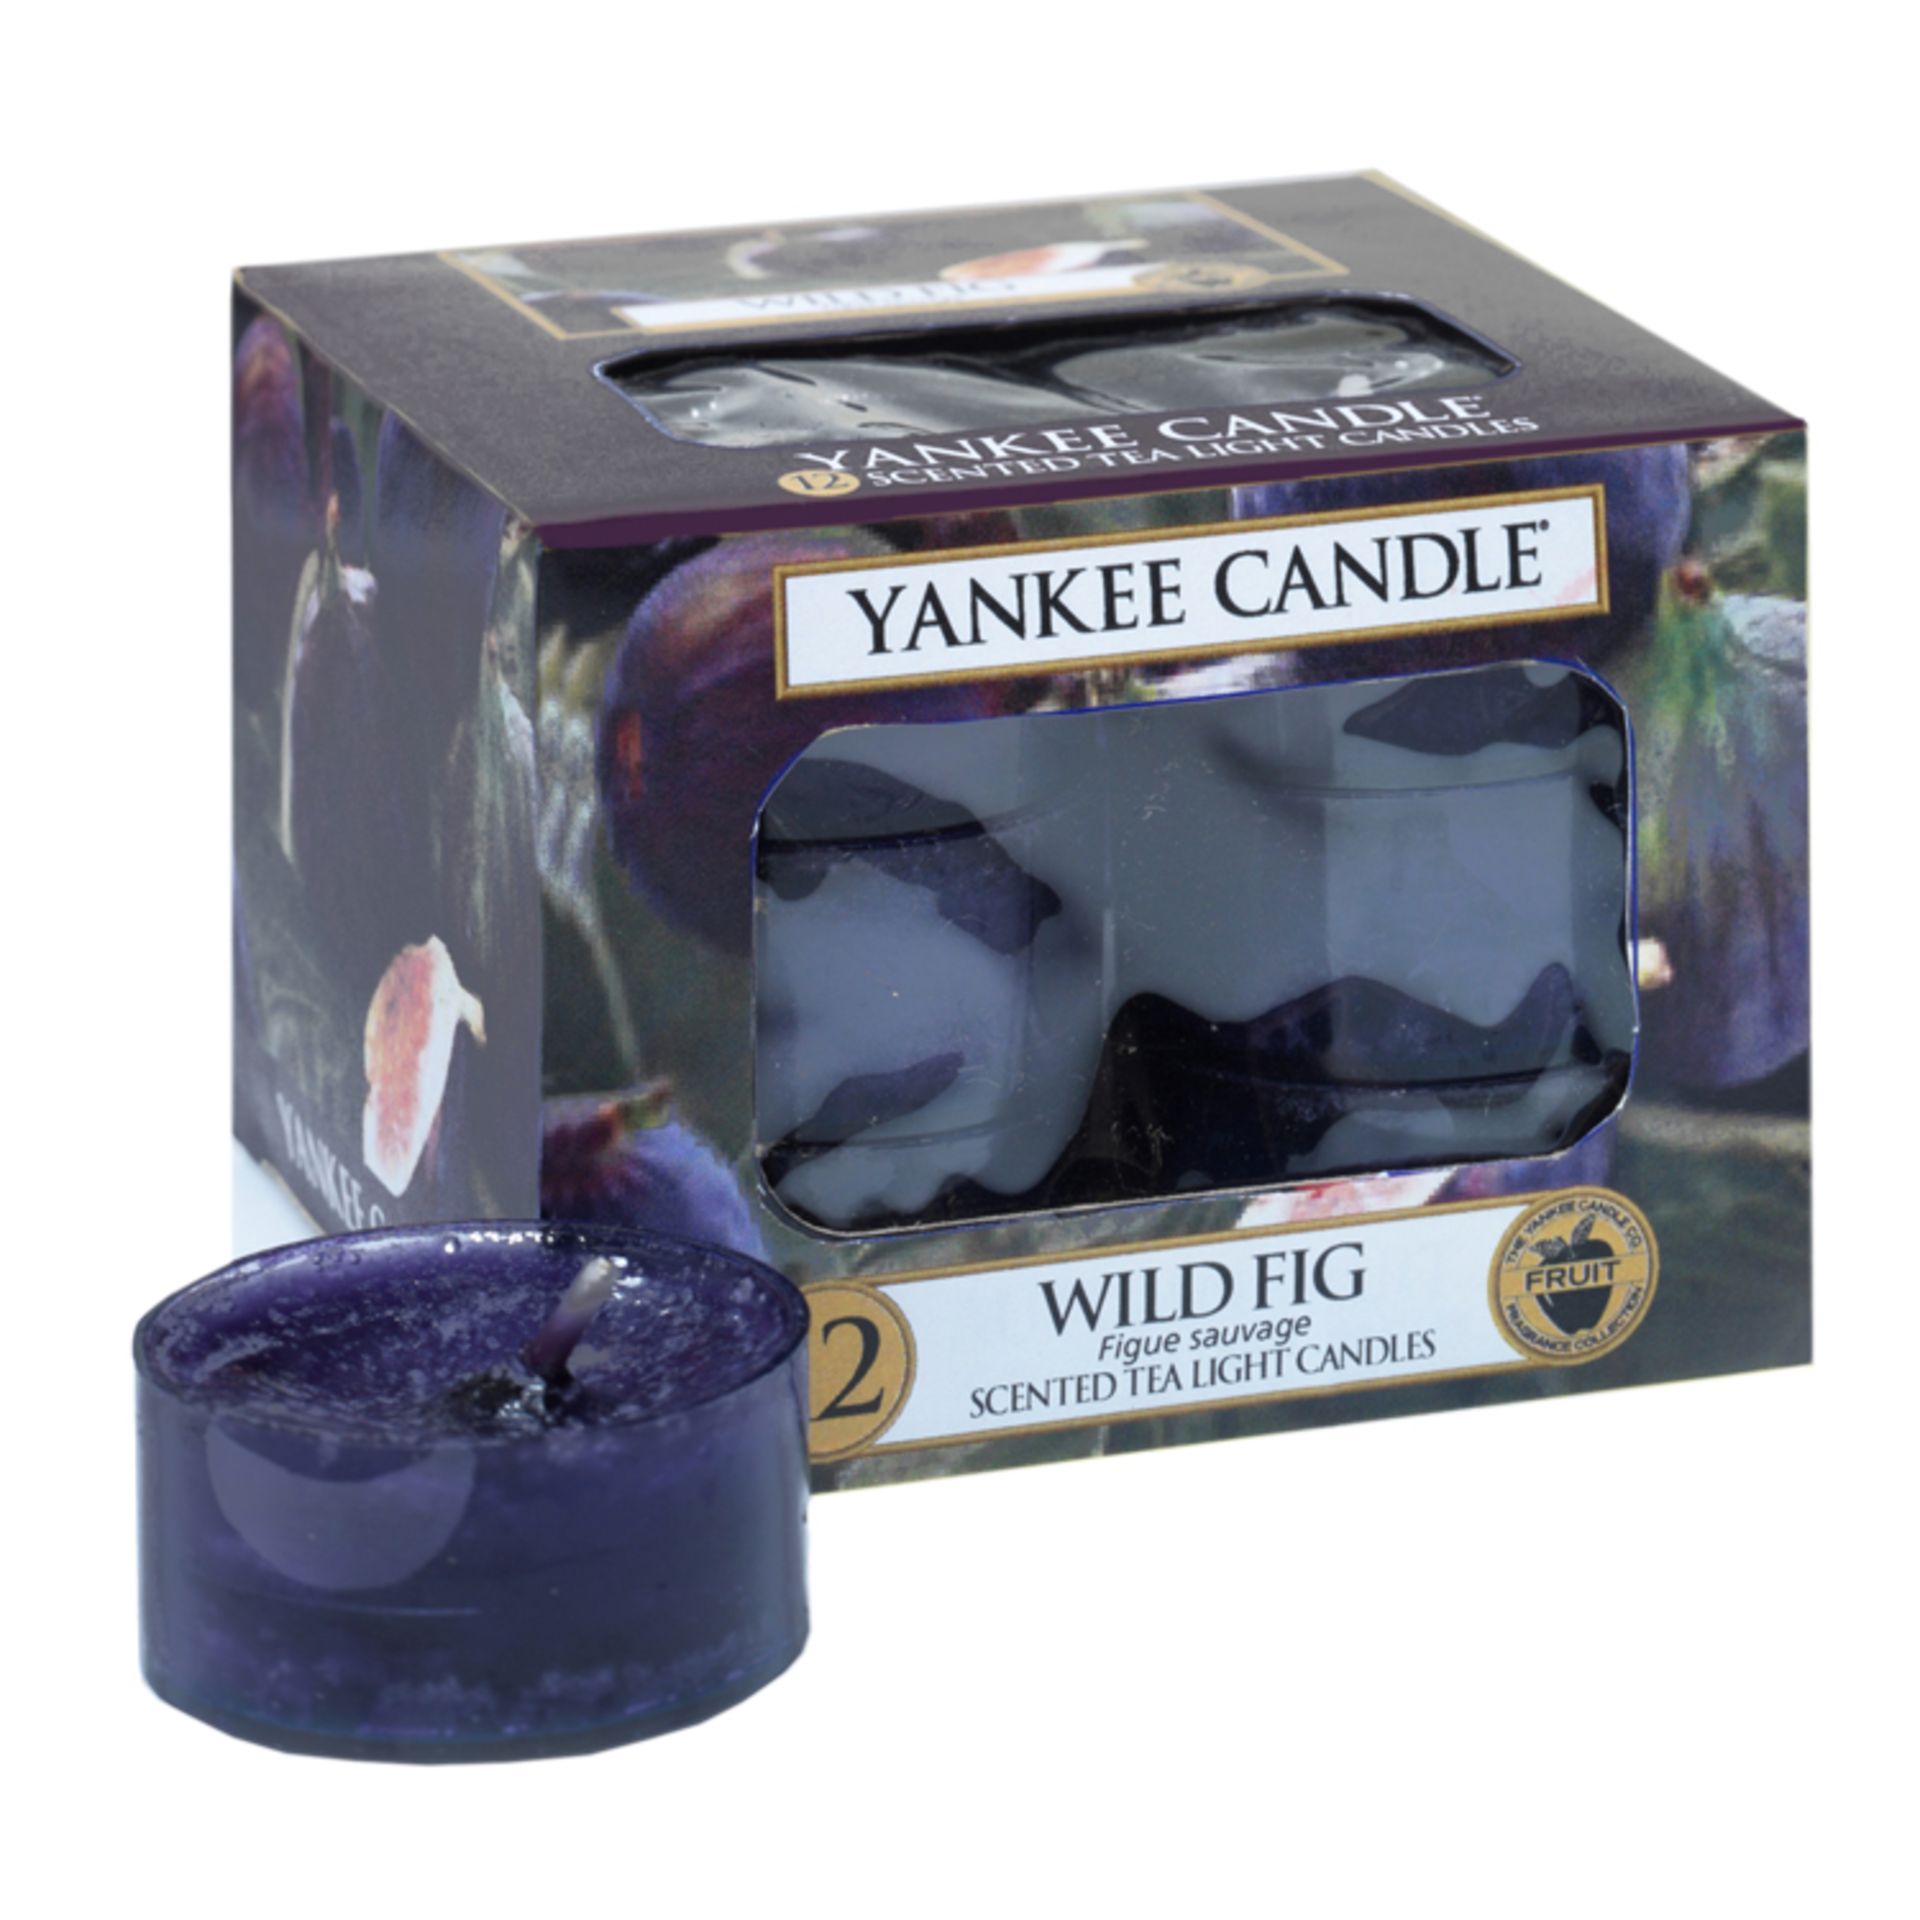 V *TRADE QTY* Brand New 12 Yankee Candle Scented Tea Light Candles Wild Fig eBay Price £7.75 X 10